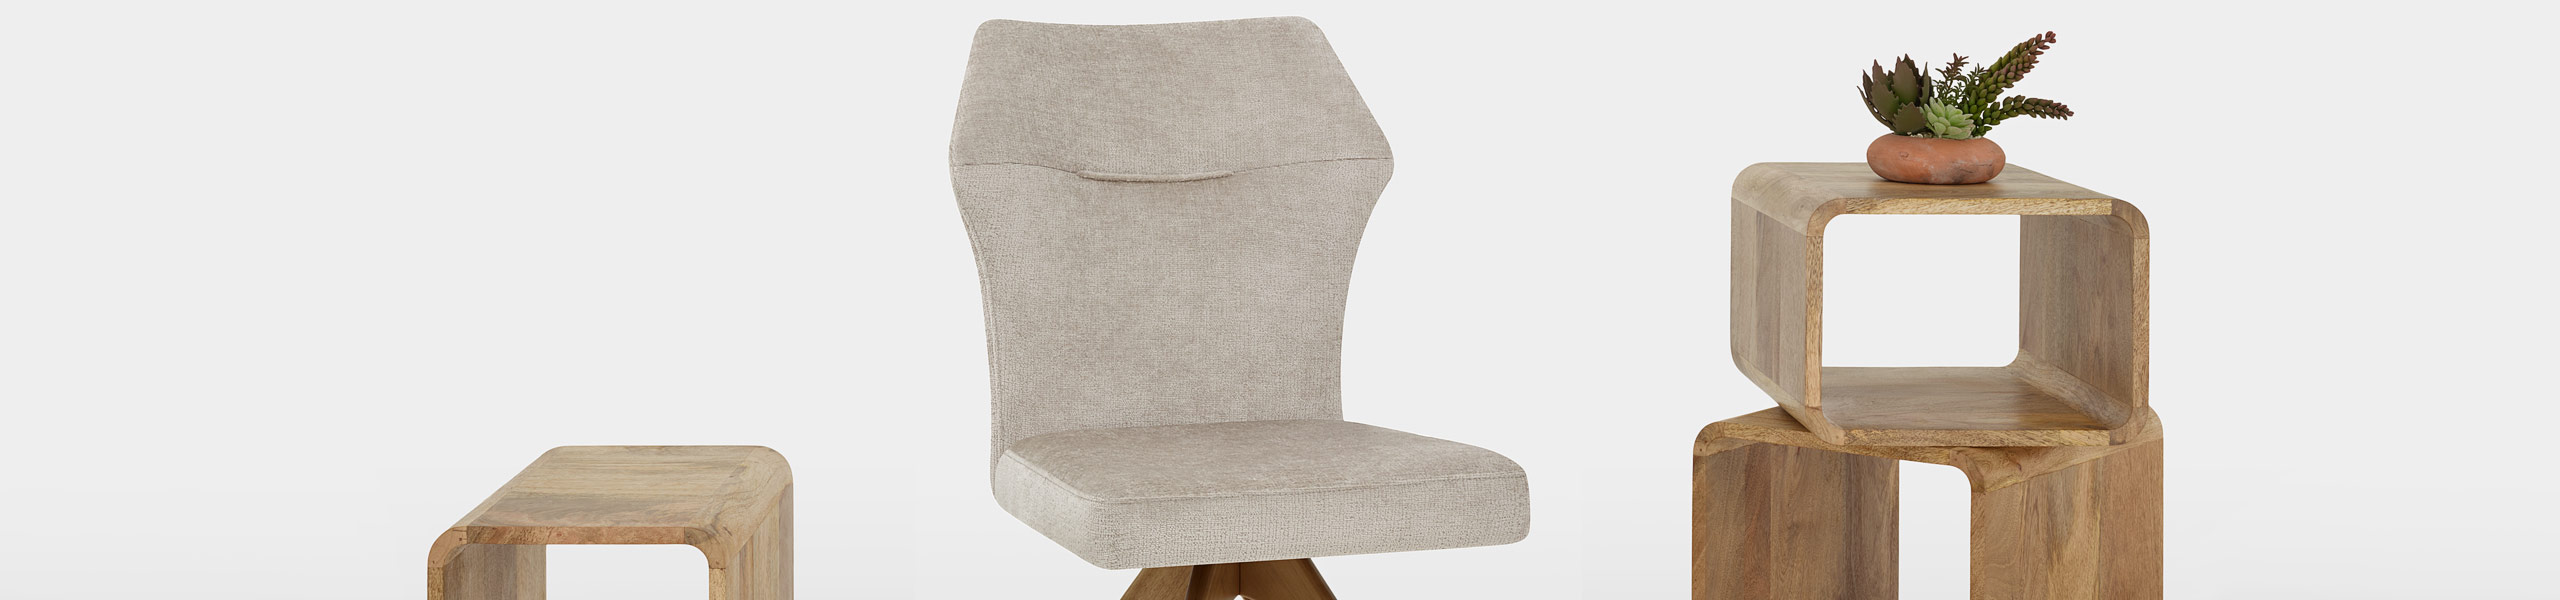 Troy Wooden Dining Chair Beige Fabric Video Banner